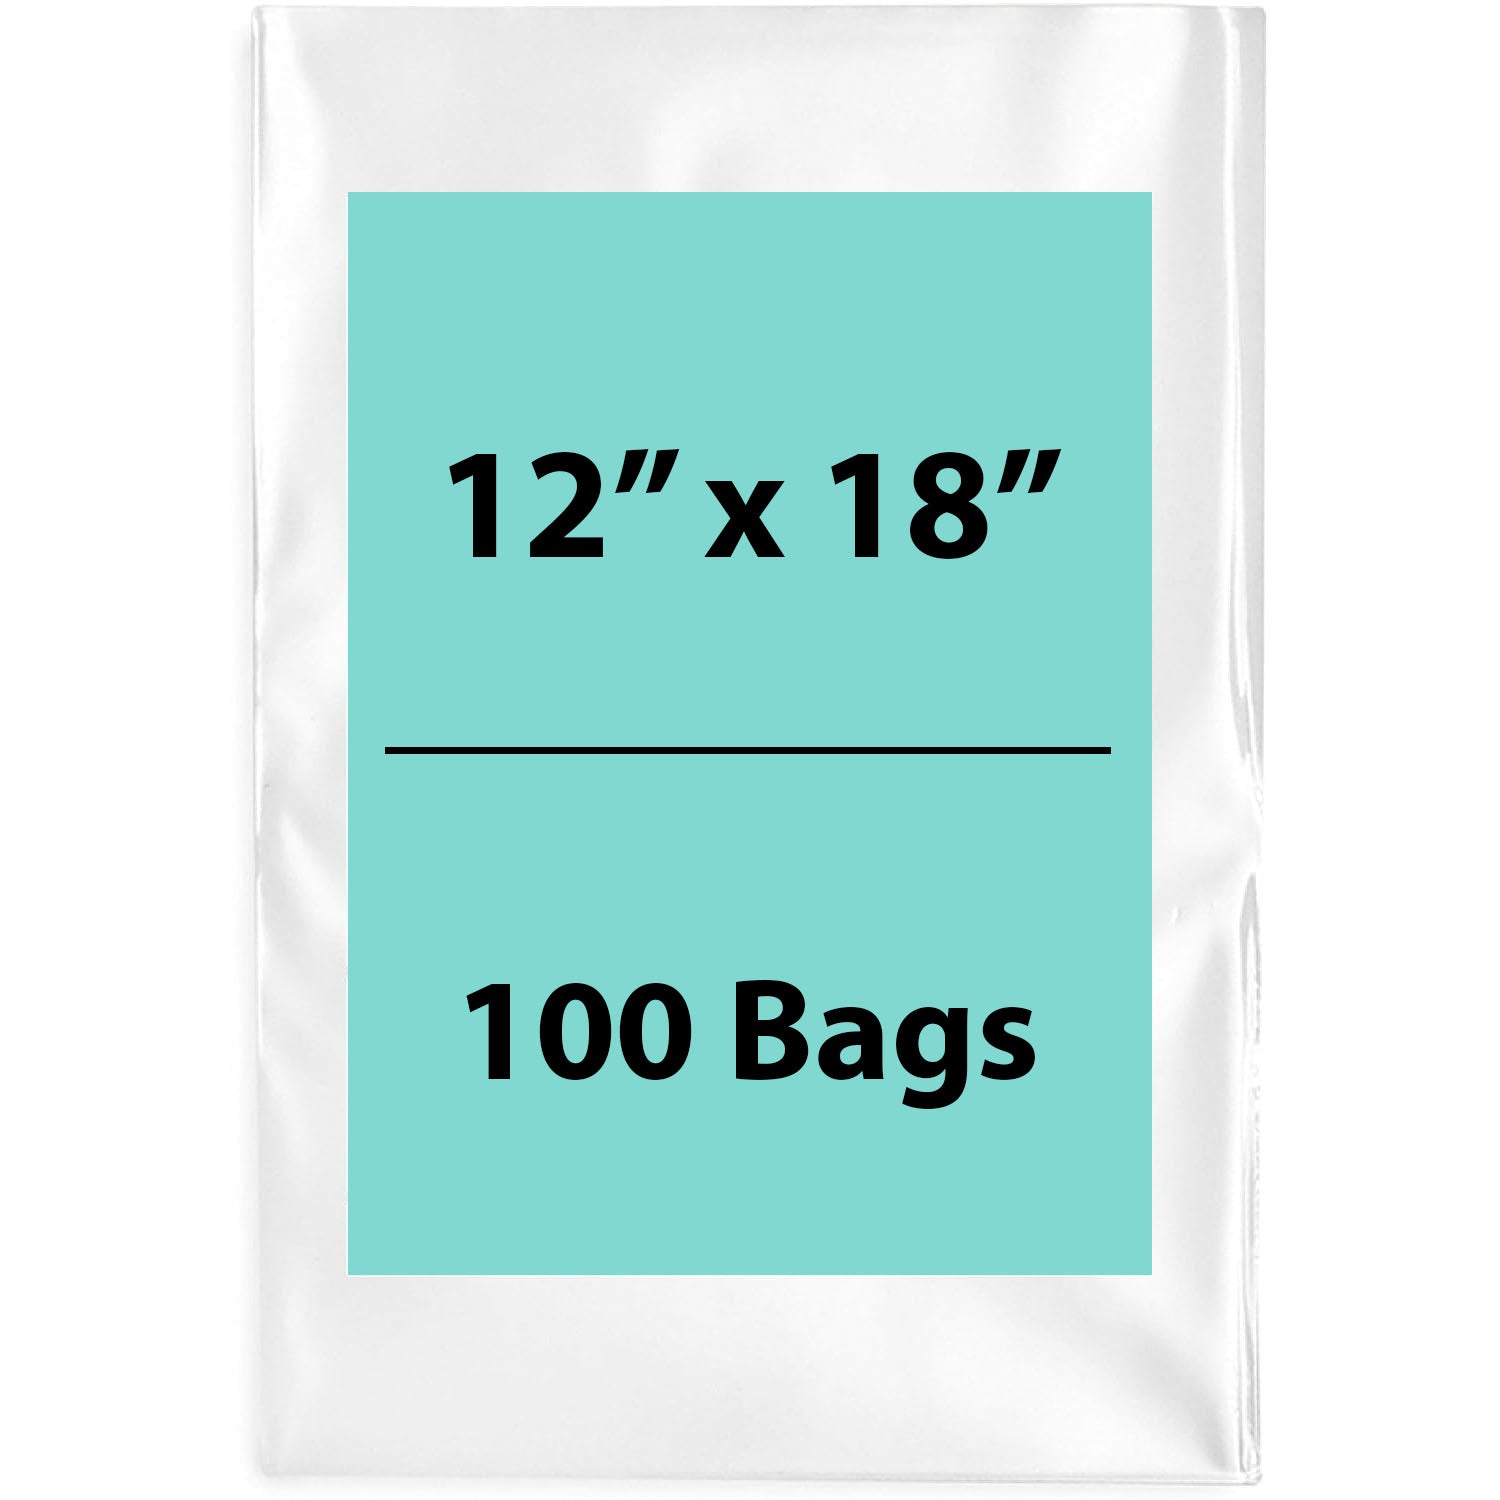 Clear Poly Bags 6Mil 12X18 Flat Open Top (LDPE)